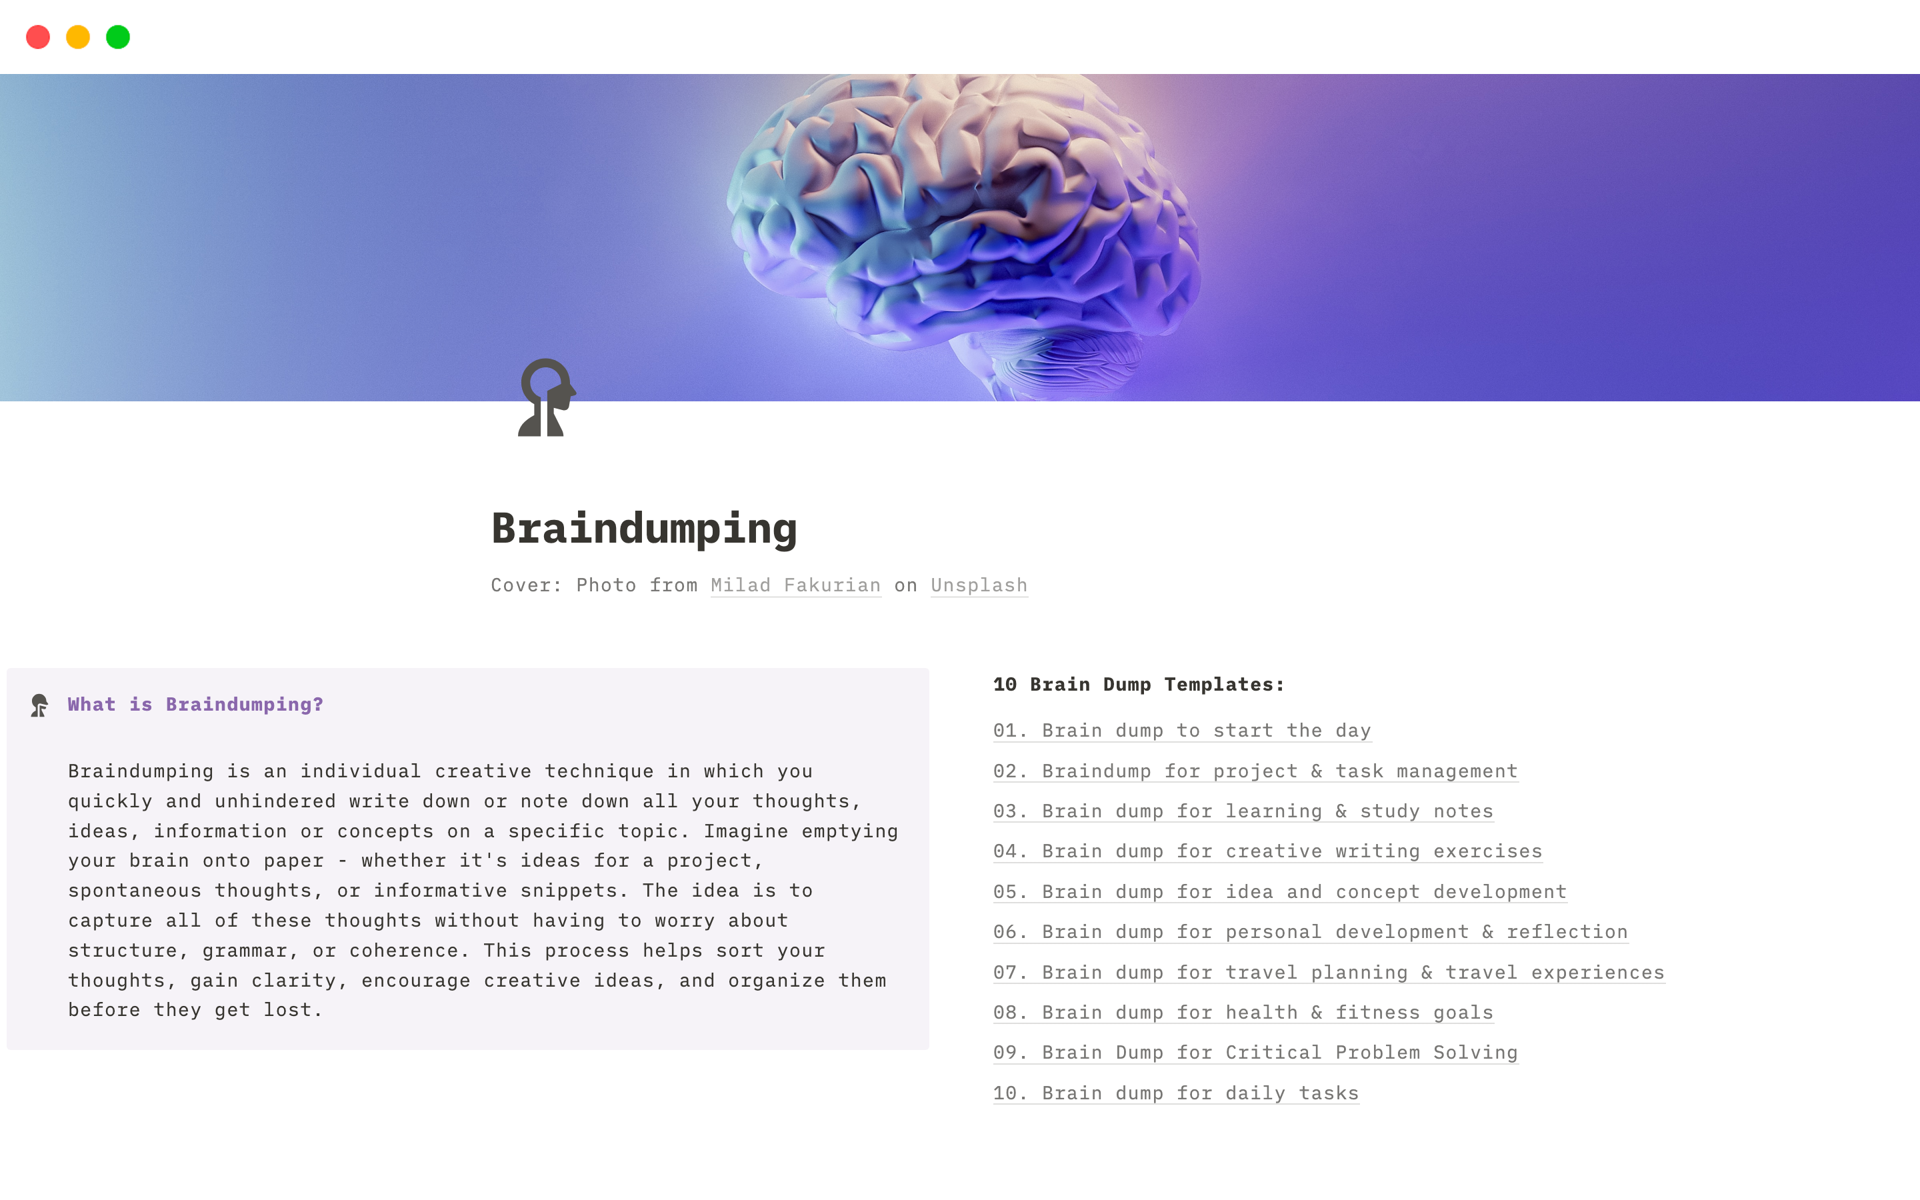 The “Braindumping” Notion Template offers 10 individual brain dump templates specifically tailored to meet your specific needs.